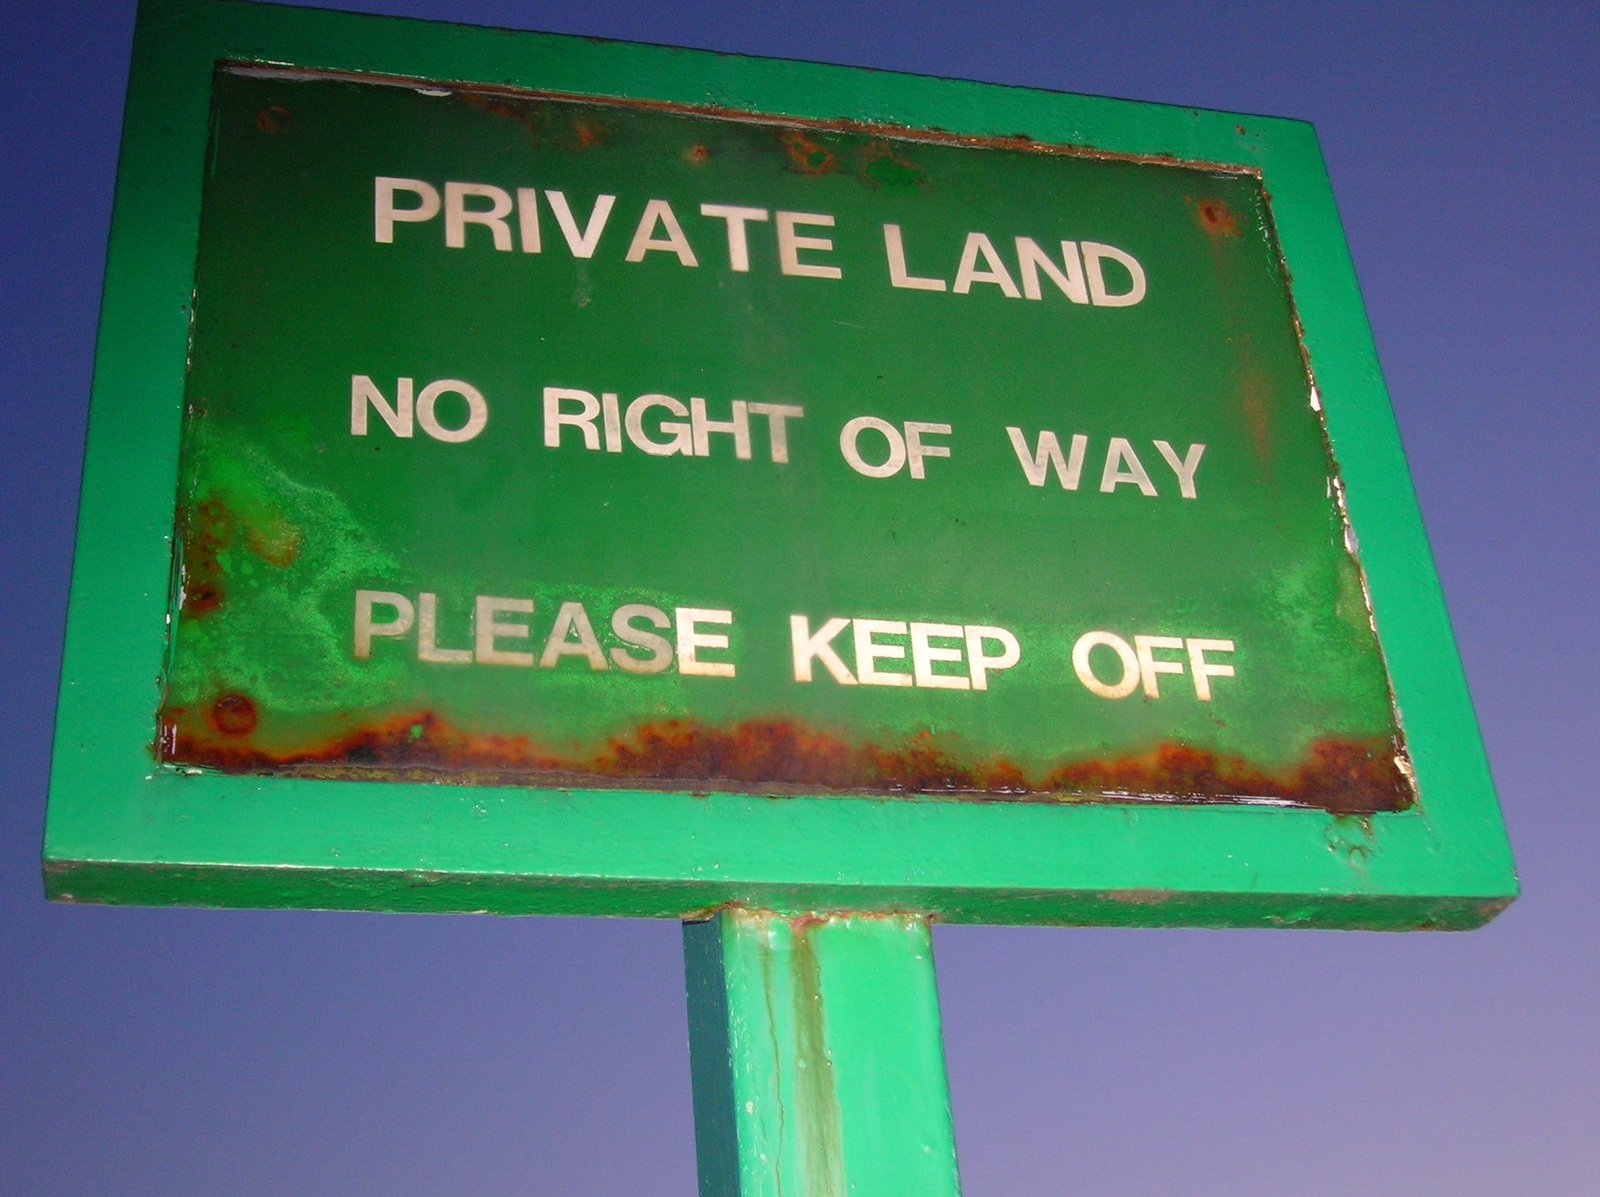 a green sign saying private land is on a street pole